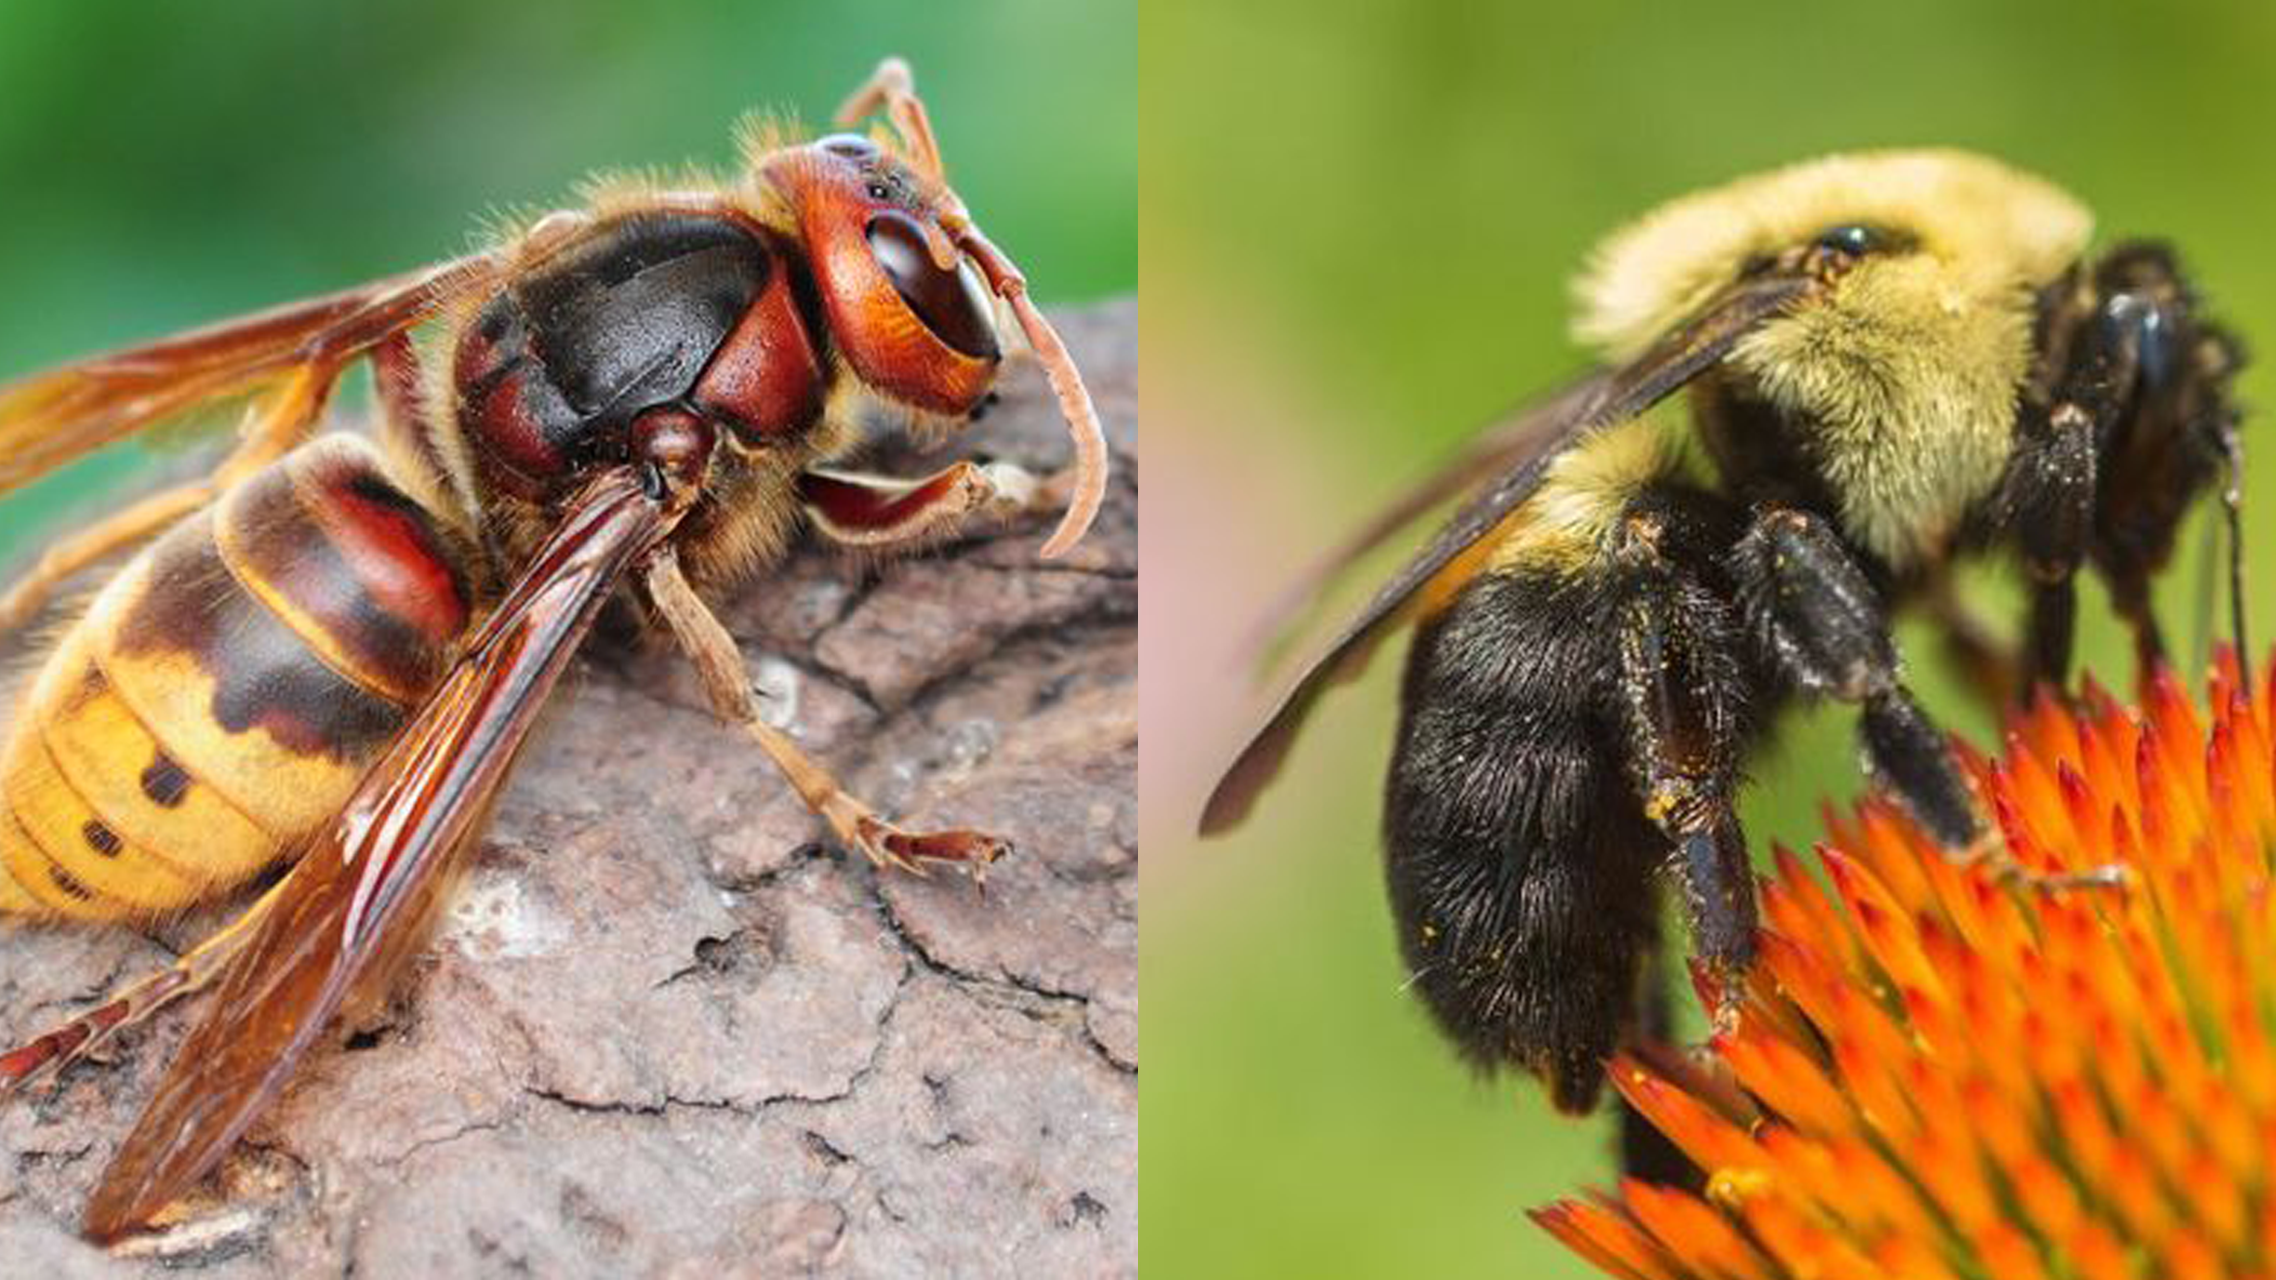 difference between hornet and bee